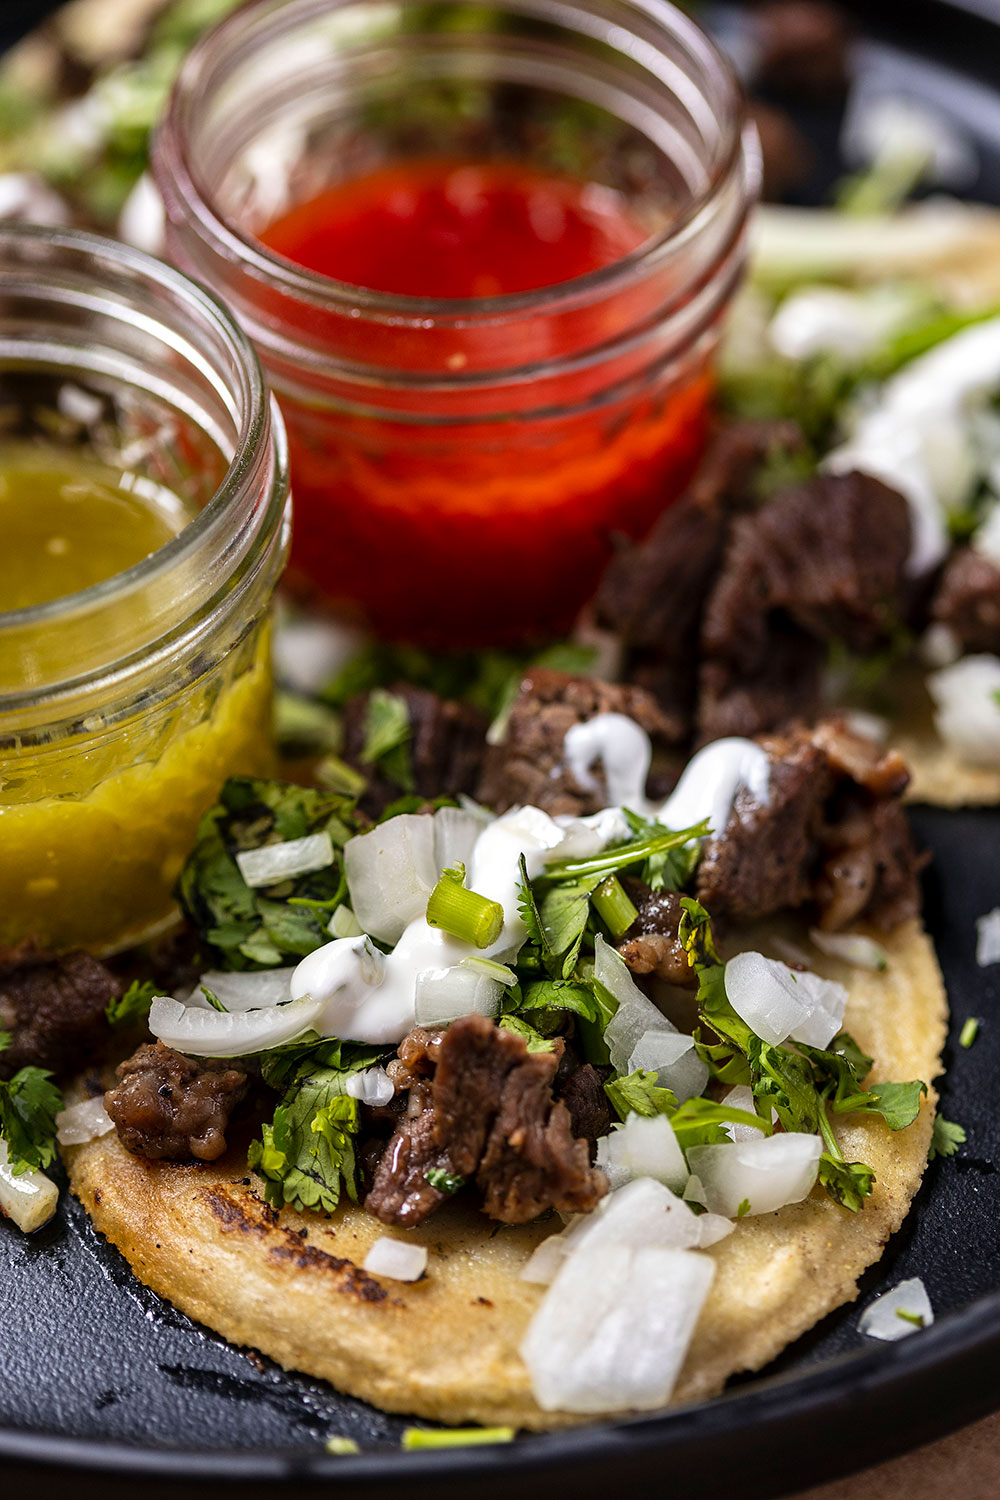 Nancy’s Tacos feature ribeye trim, handmade corn tortillas, and two types of salsa.